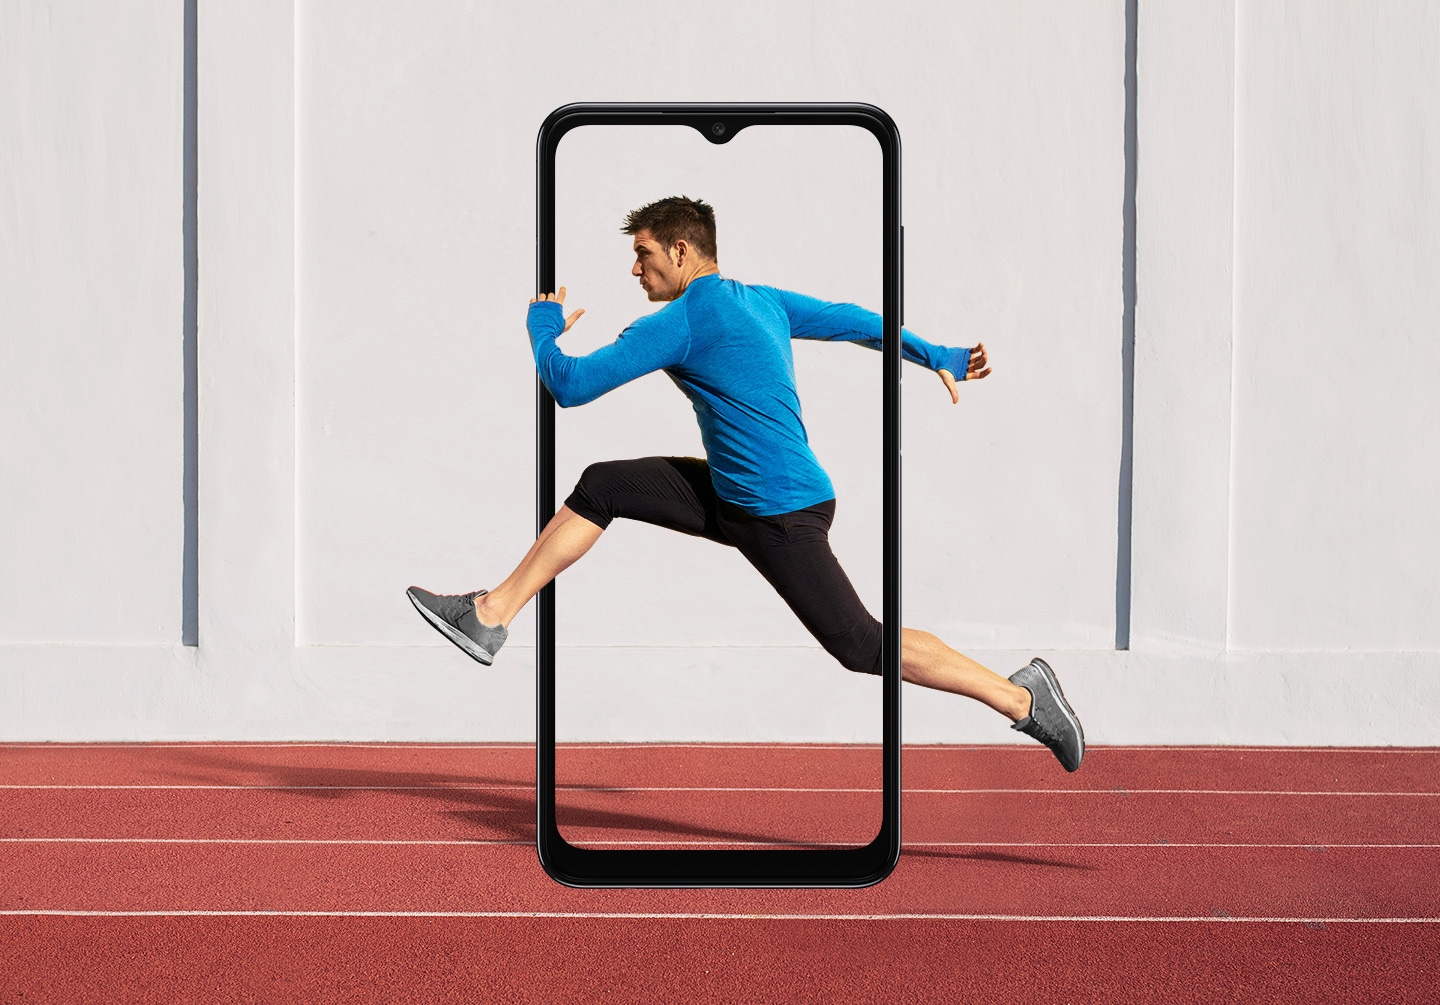 The outline of a Galaxy A04s display is set in portrait mode over a running track on a sports field. Onscreen is a man running, striding into the air with his hands and legs extending beyond the frame.